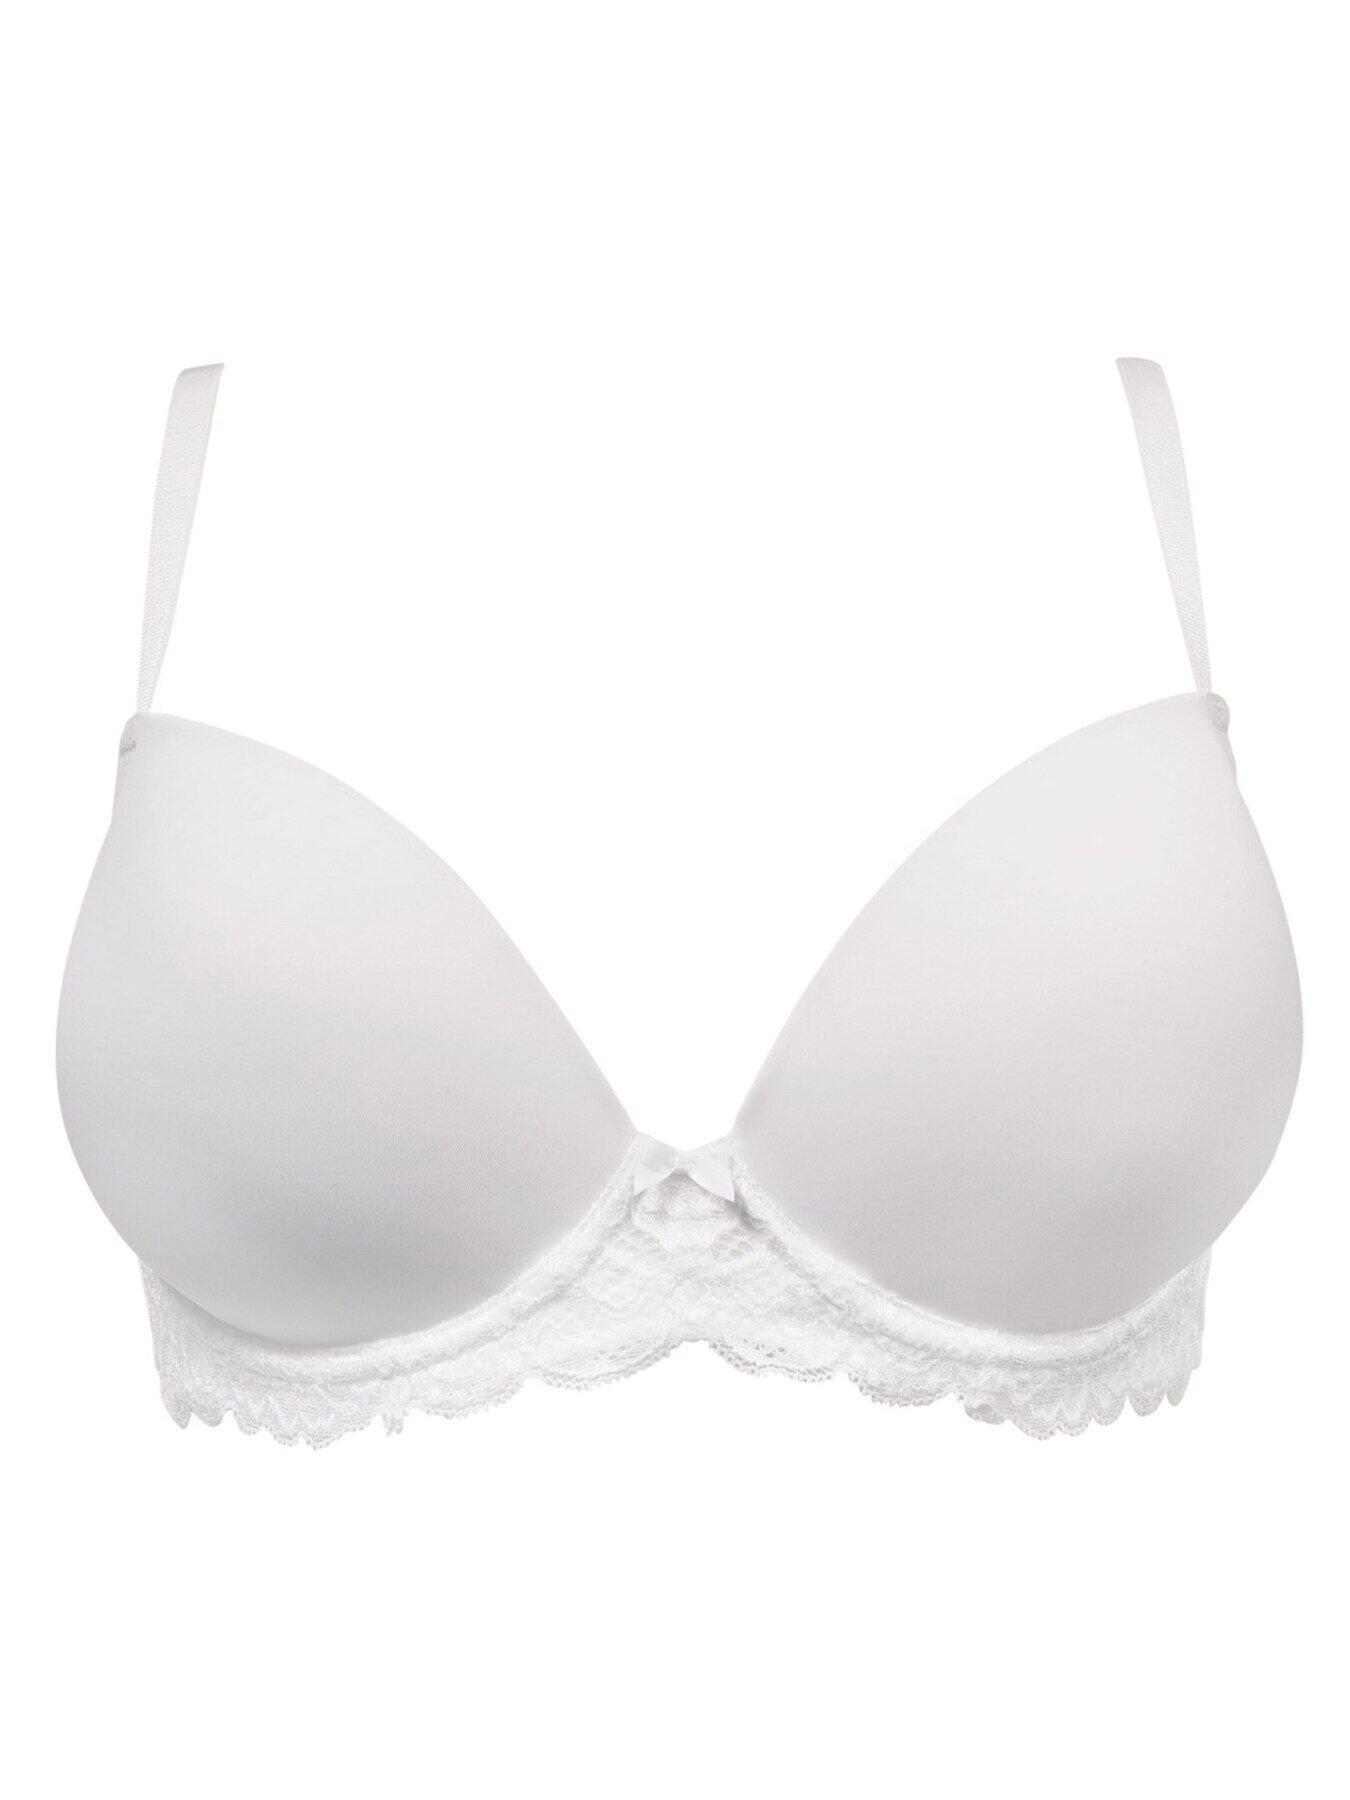 Pour Moi Forever Fiore Plunge Push Up Tshirt Bra - White